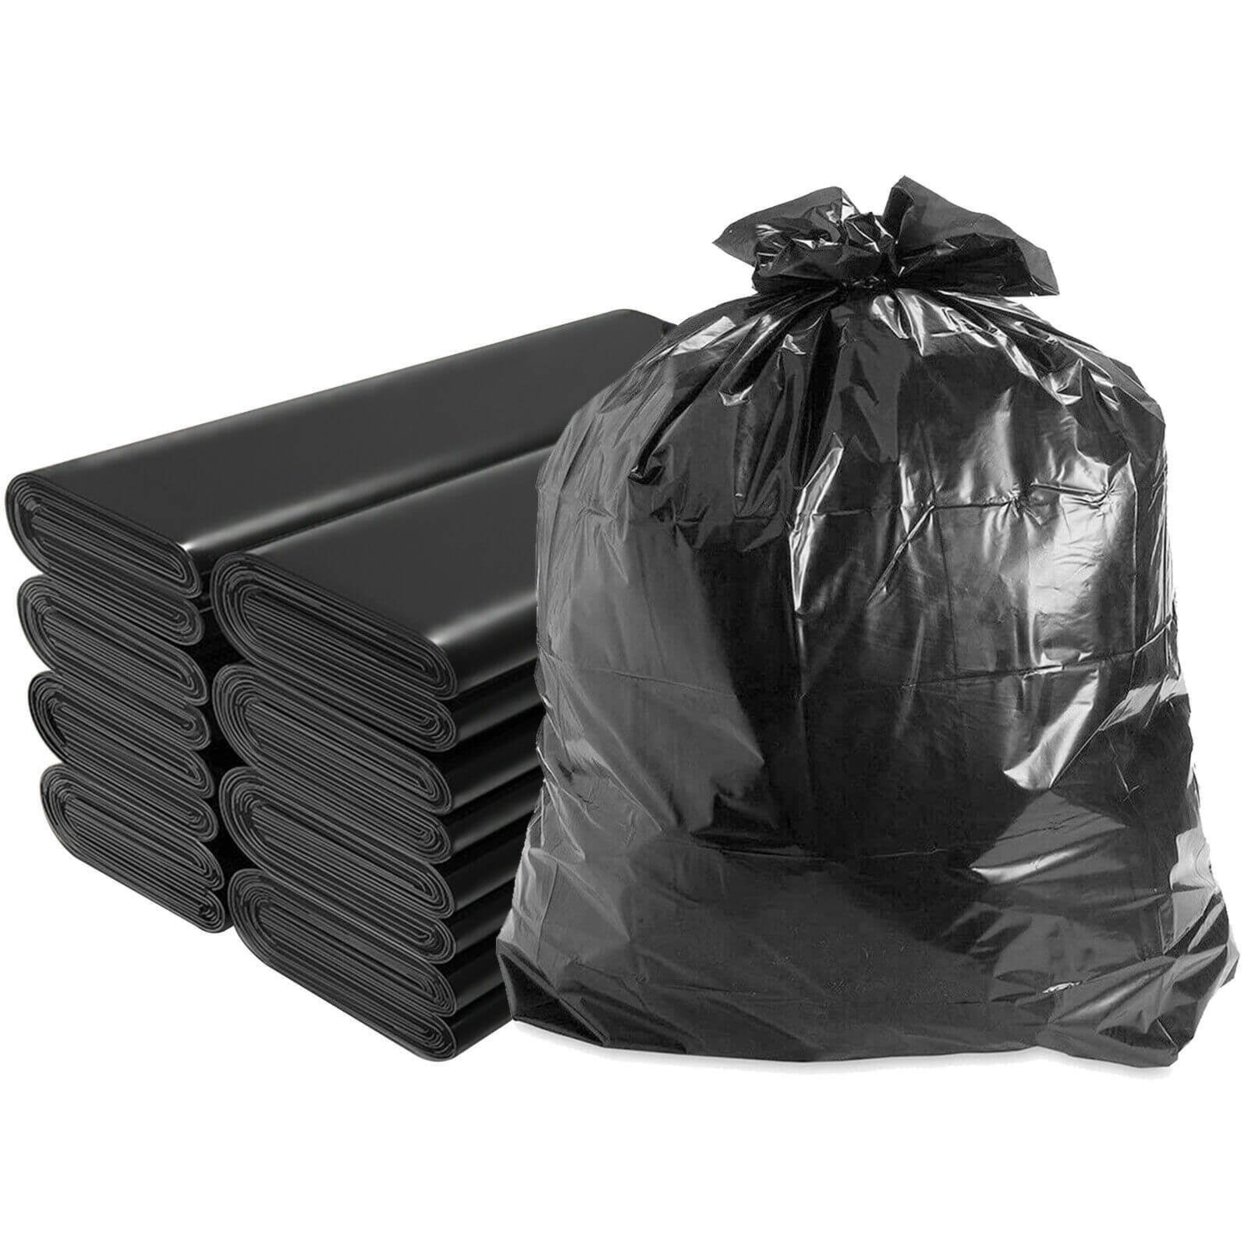 65 Gallon Trash Bags, Large Black Trash Bags (50 Count) : Amazon.in: Home &  Kitchen